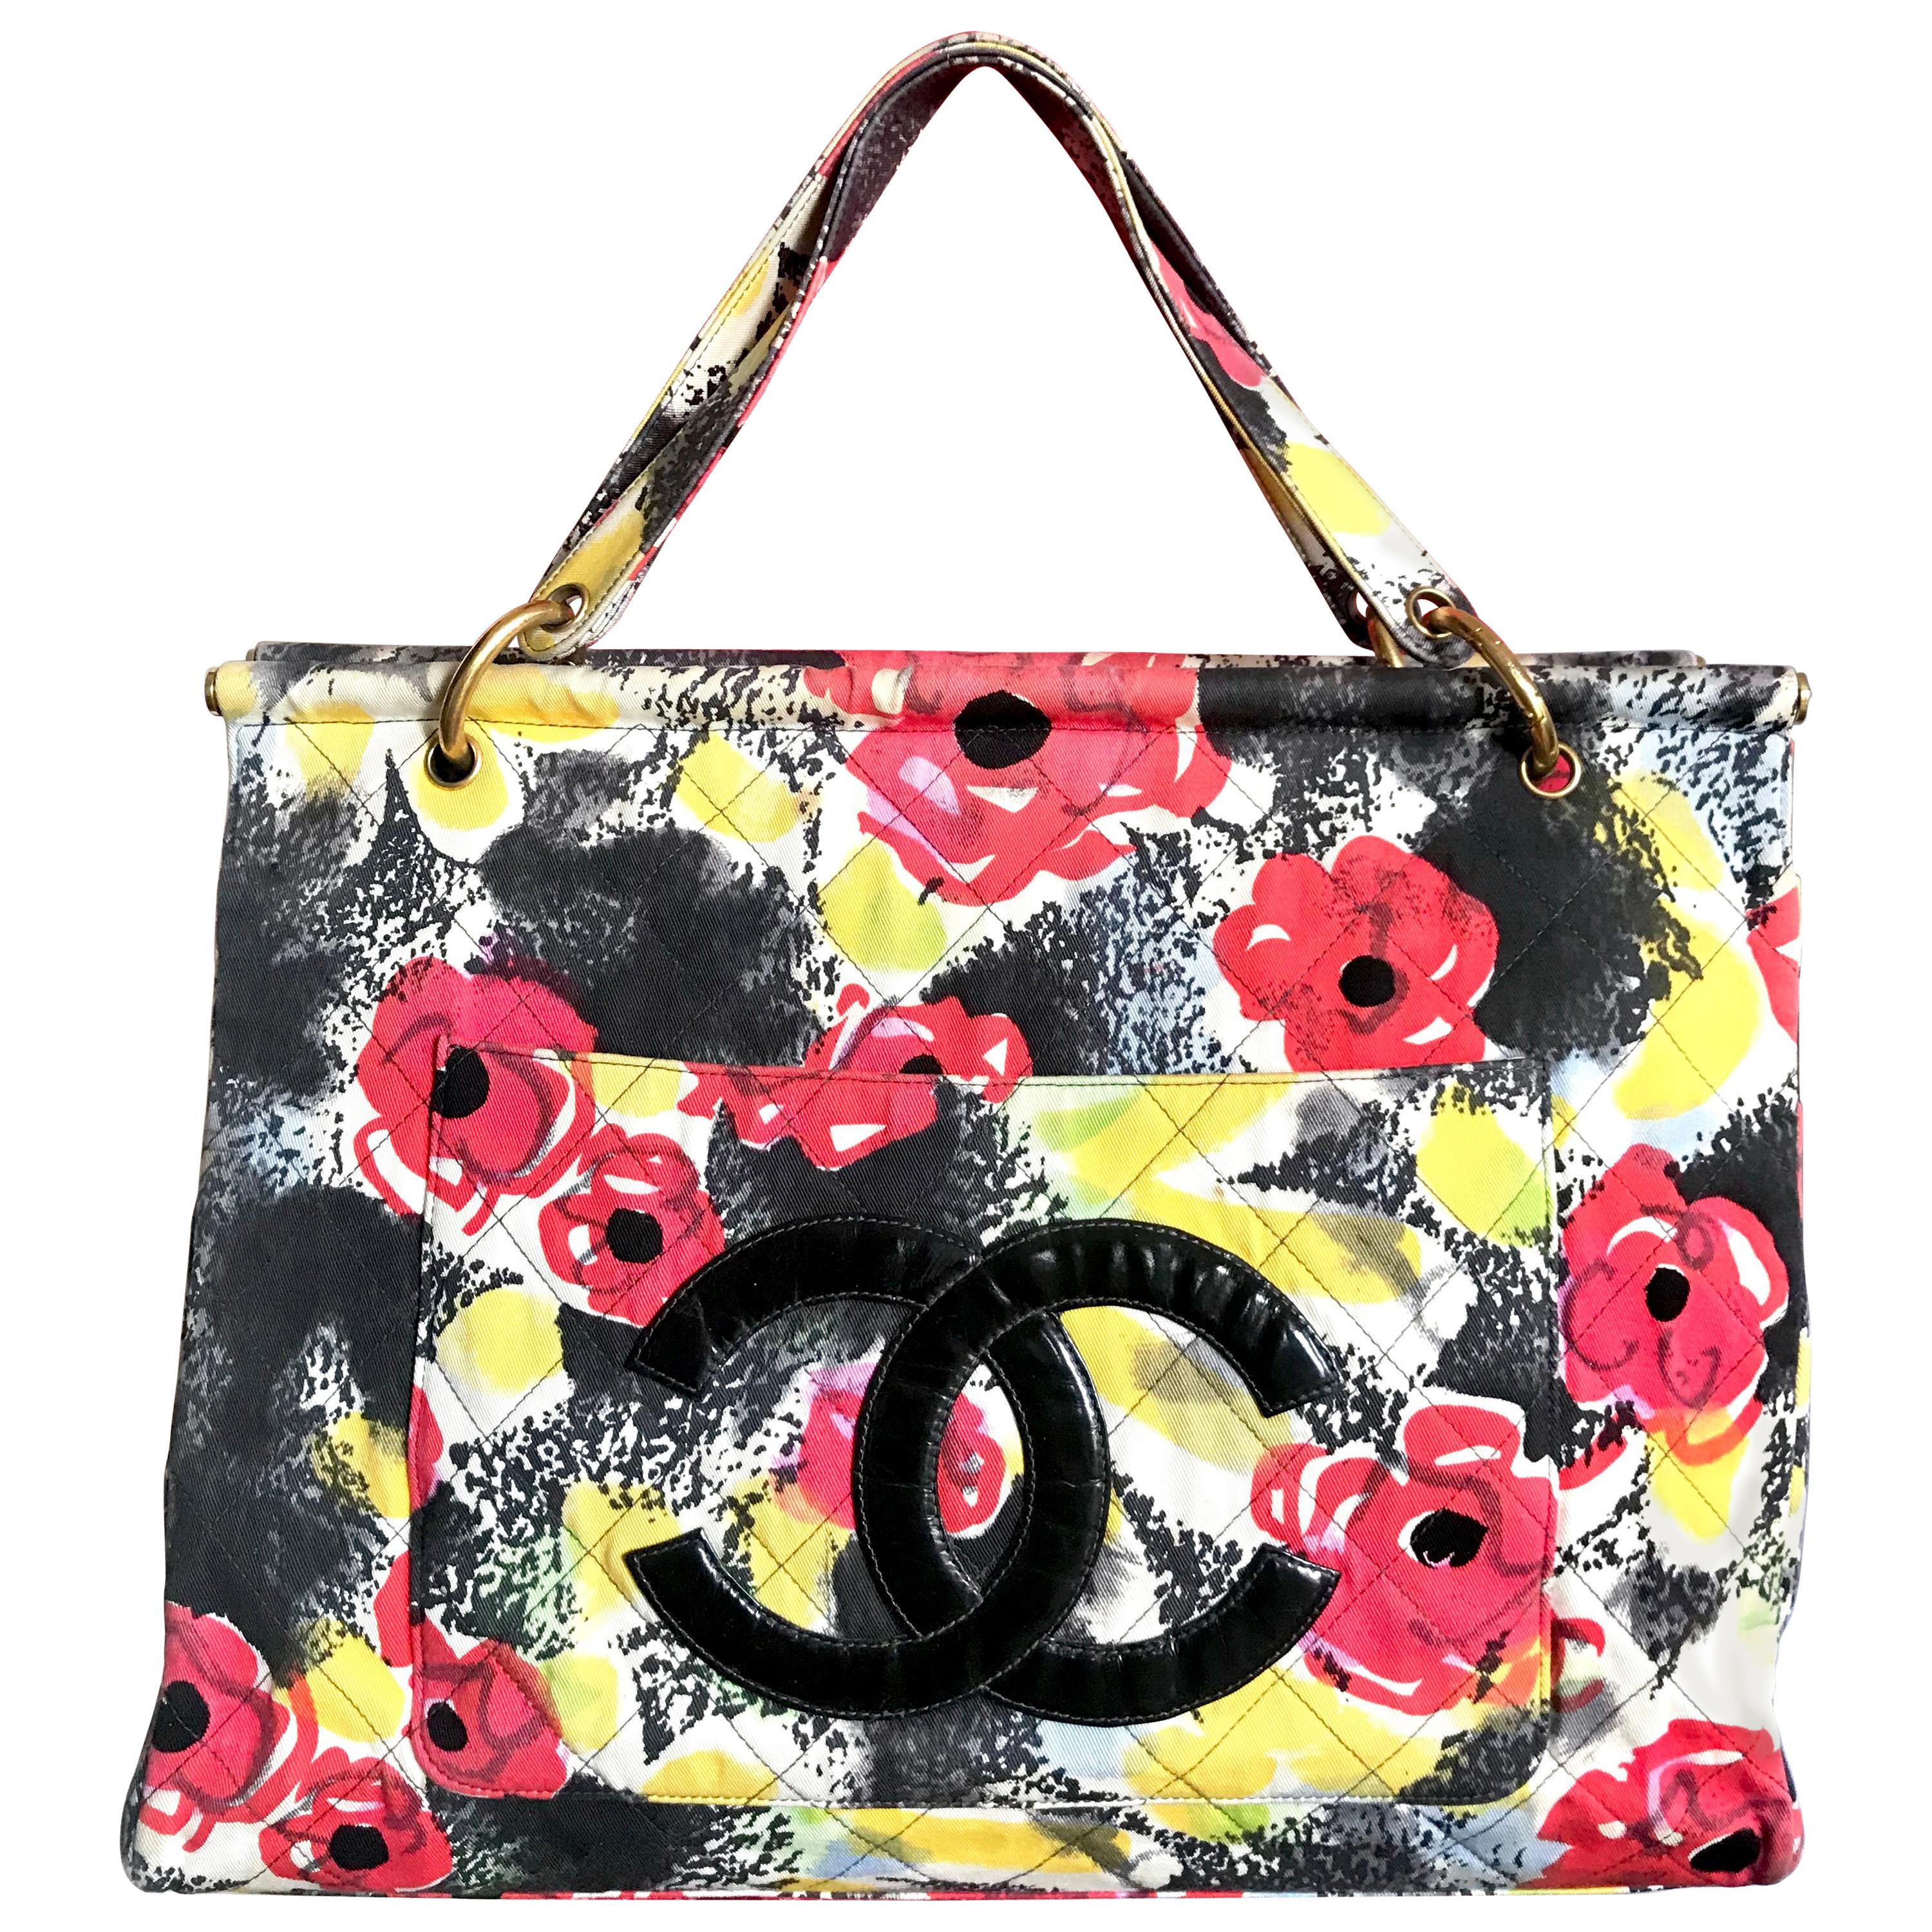 Vintage CHANEL red flower, yellow, and black water color print large tote bag. For Sale